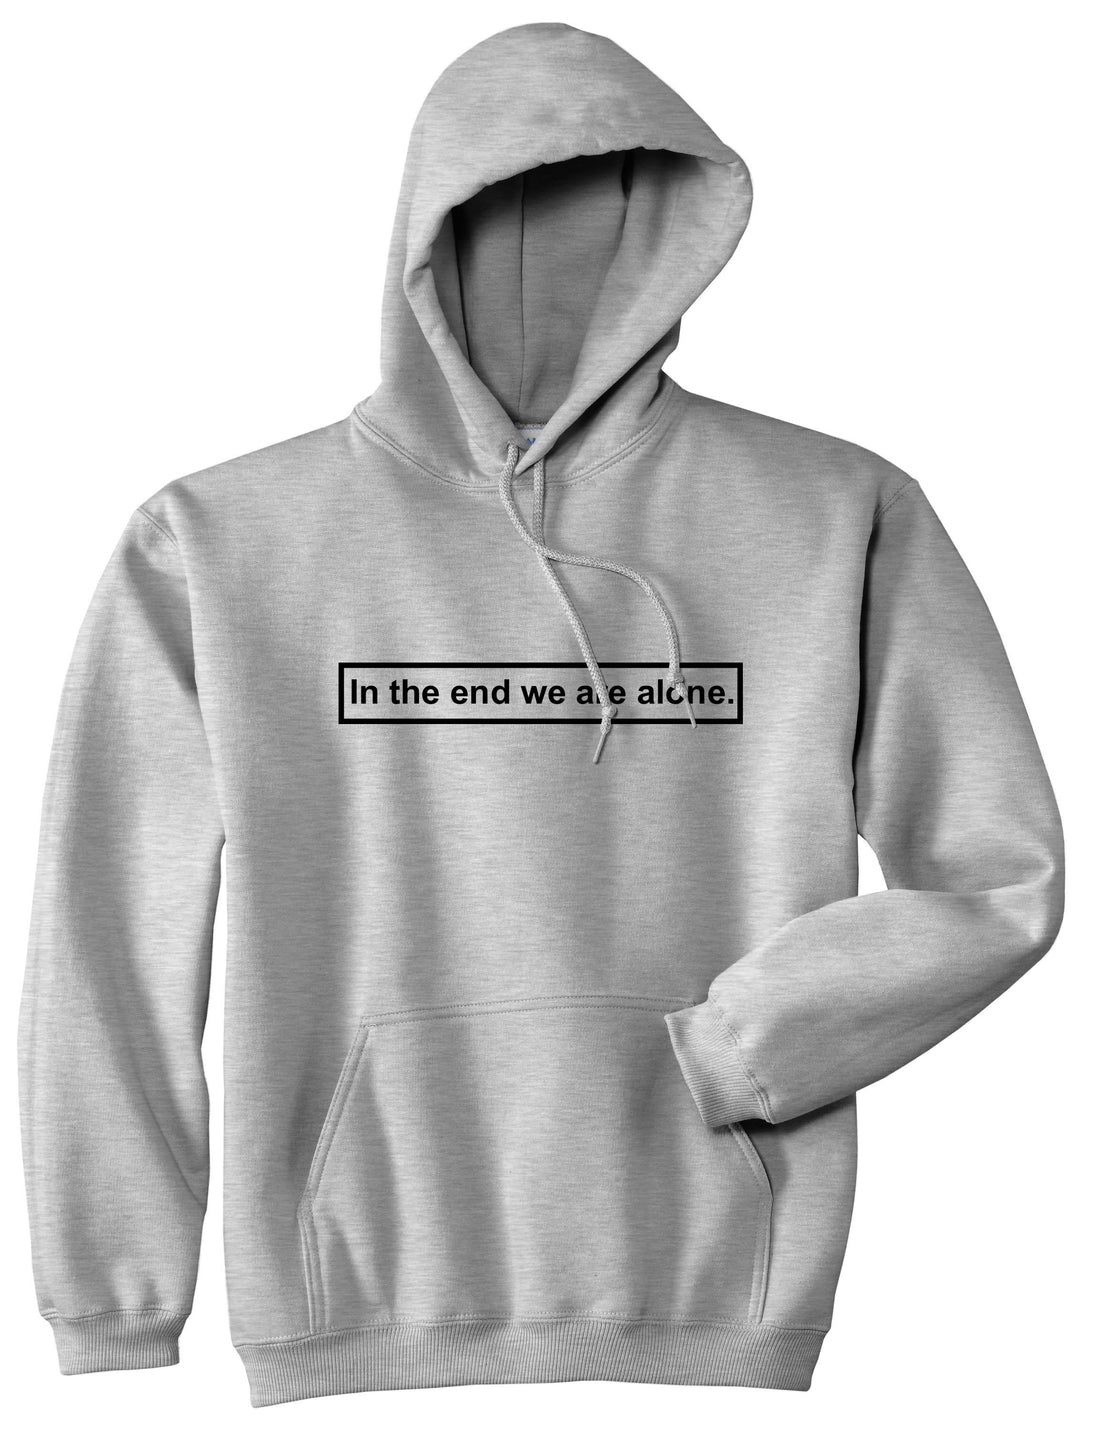 In The End We Are Alone Mens Pullover Hoodie Sweatshirt Grey